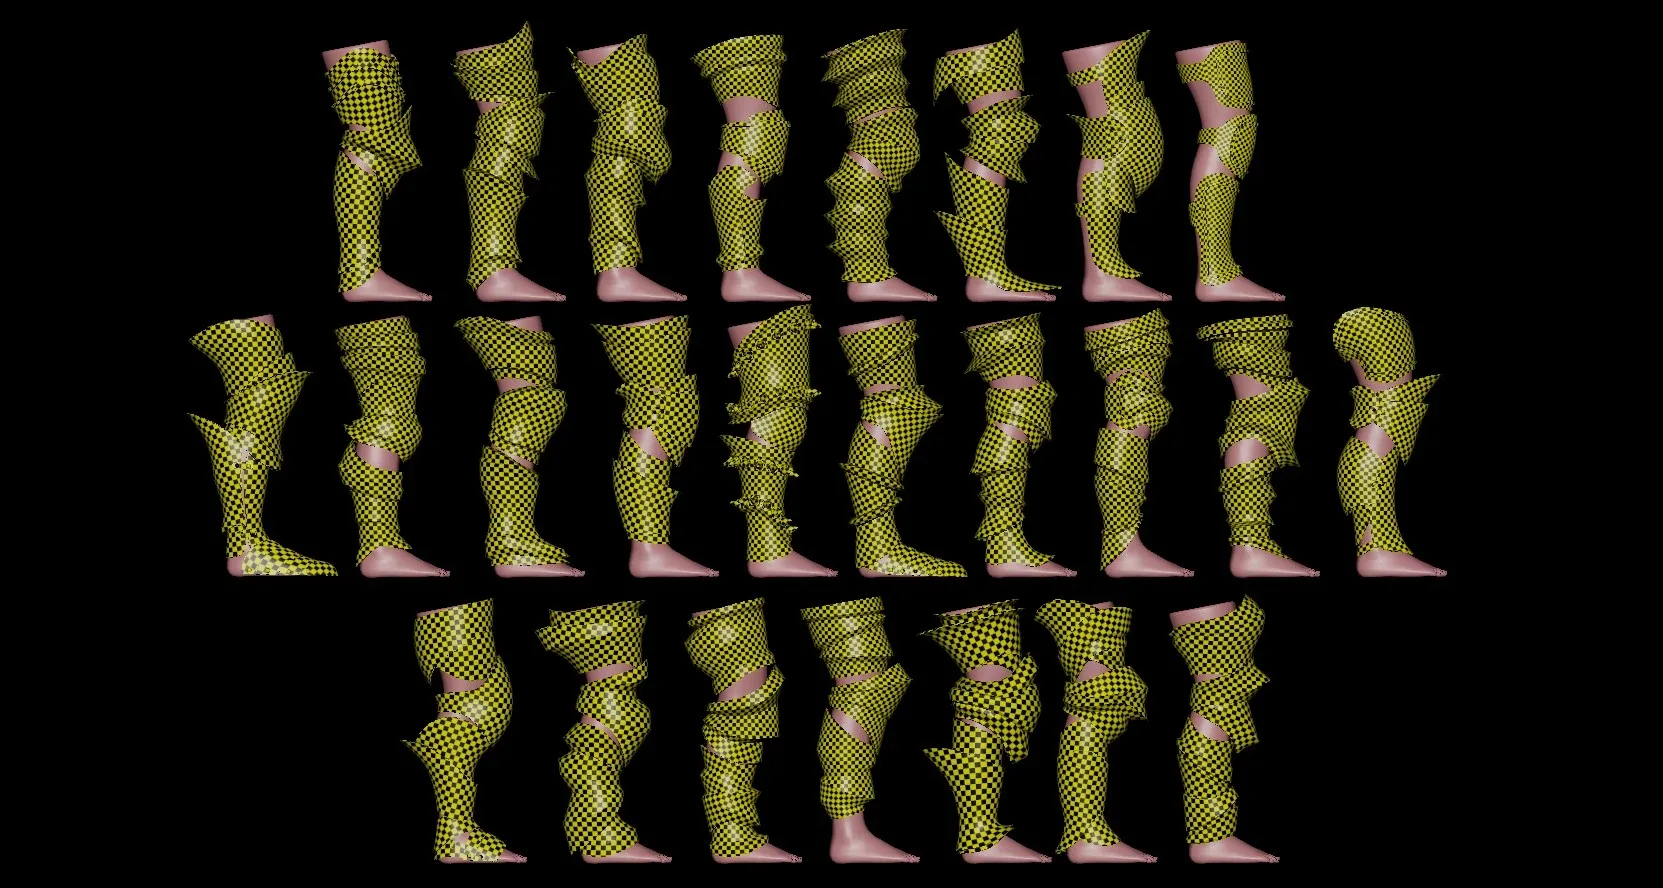 Leg Armor Highpoly and Lowpoly (With UVs) Vol 2